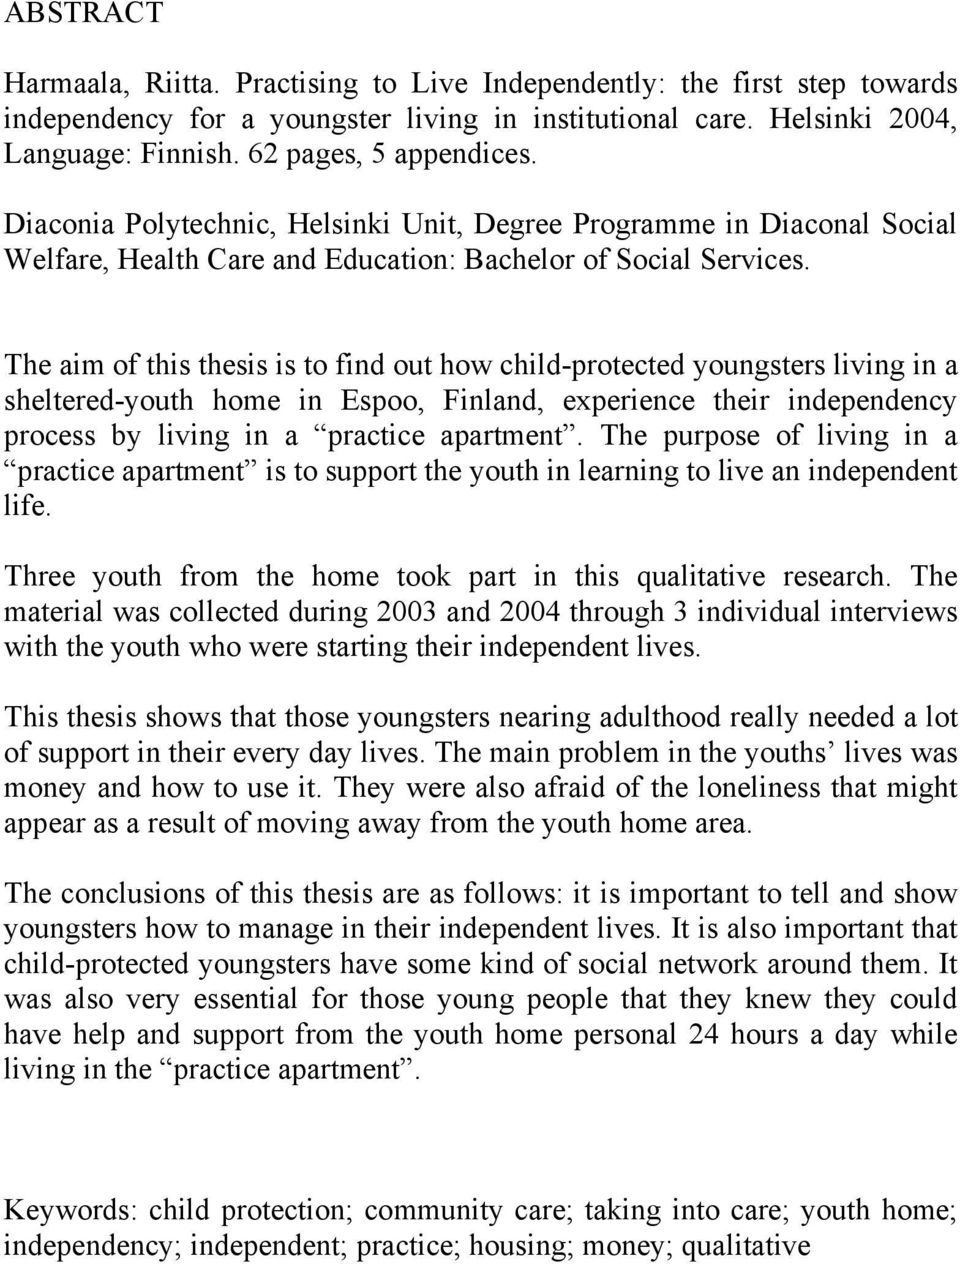 The aim of this thesis is to find out how child-protected youngsters living in a sheltered-youth home in Espoo, Finland, experience their independency process by living in a practice apartment.